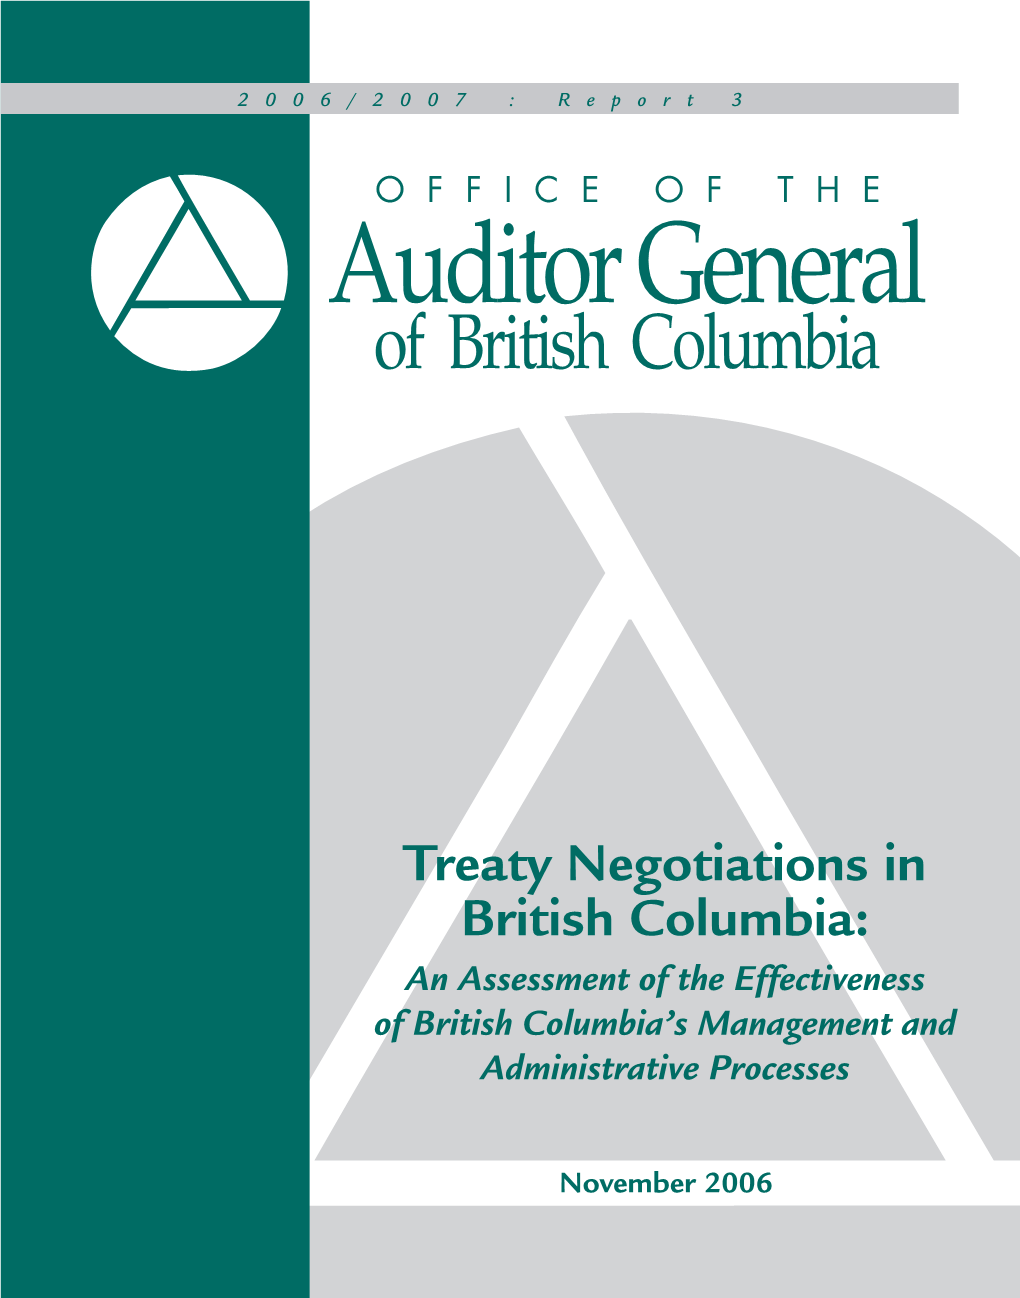 Treaty Negotiations in British Columbia: an Assessment of the Effectiveness of British Columbia’S Management and Administrative Processes